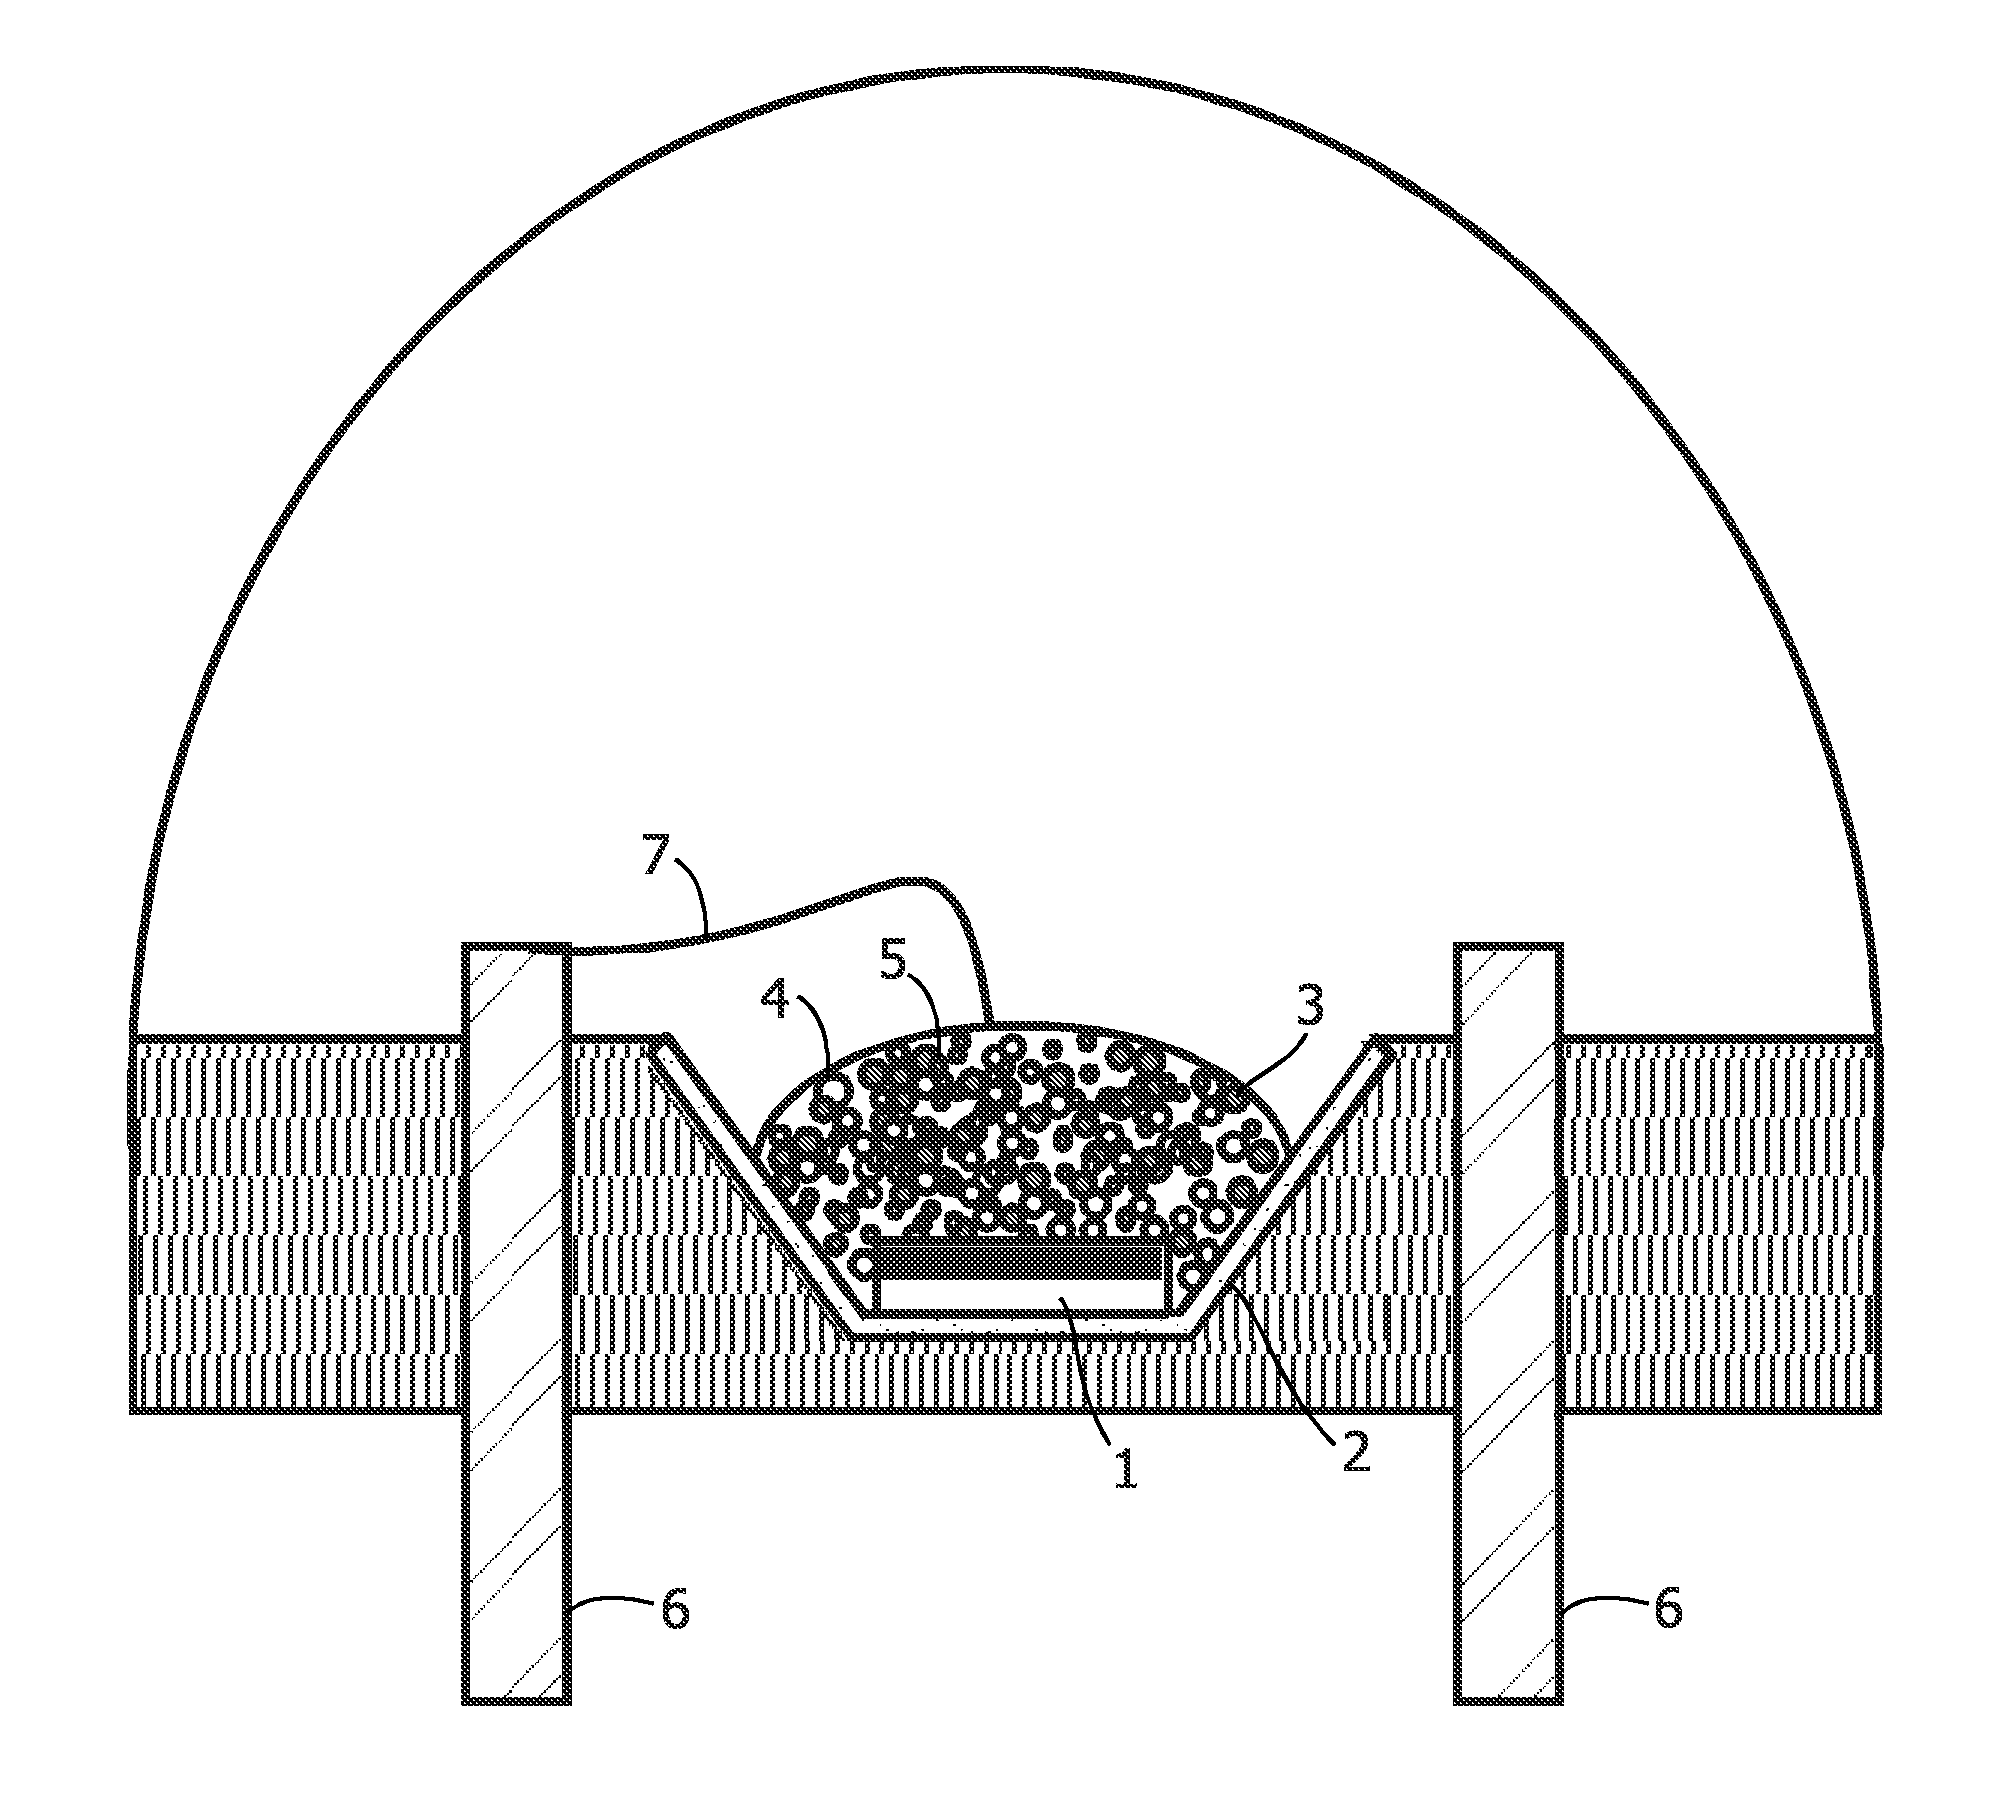 Illumination System Comprising Color Deficiency Compensating Luminescent Material